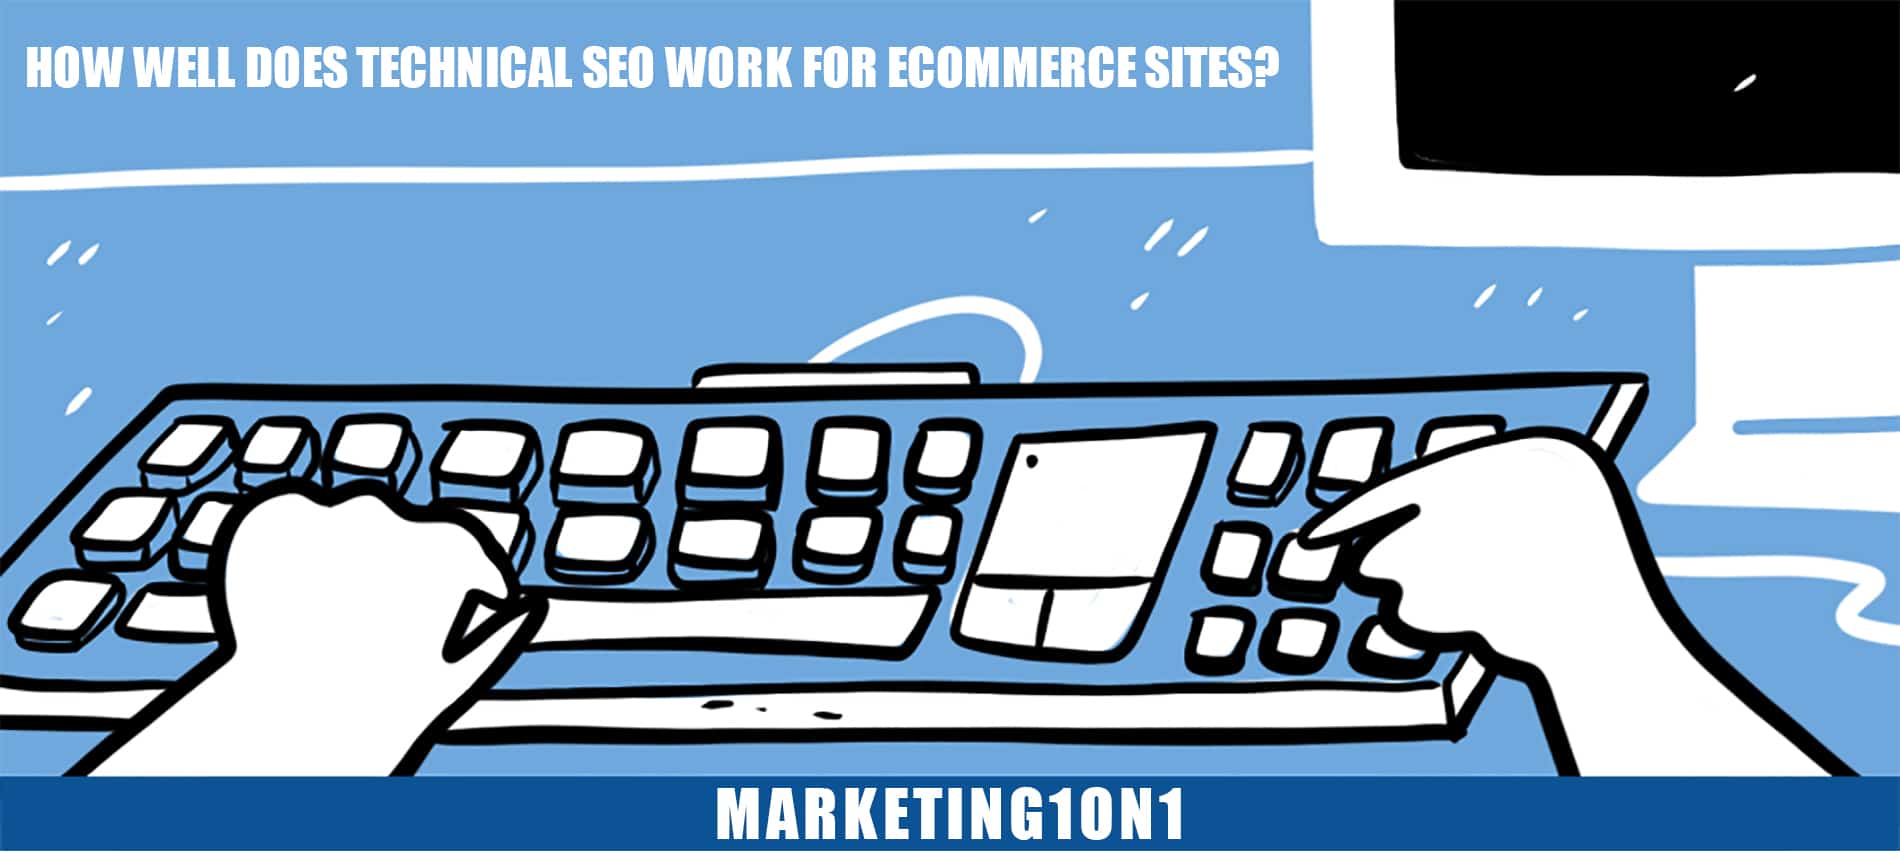 How well does technical SEO work for eCommerce sites?